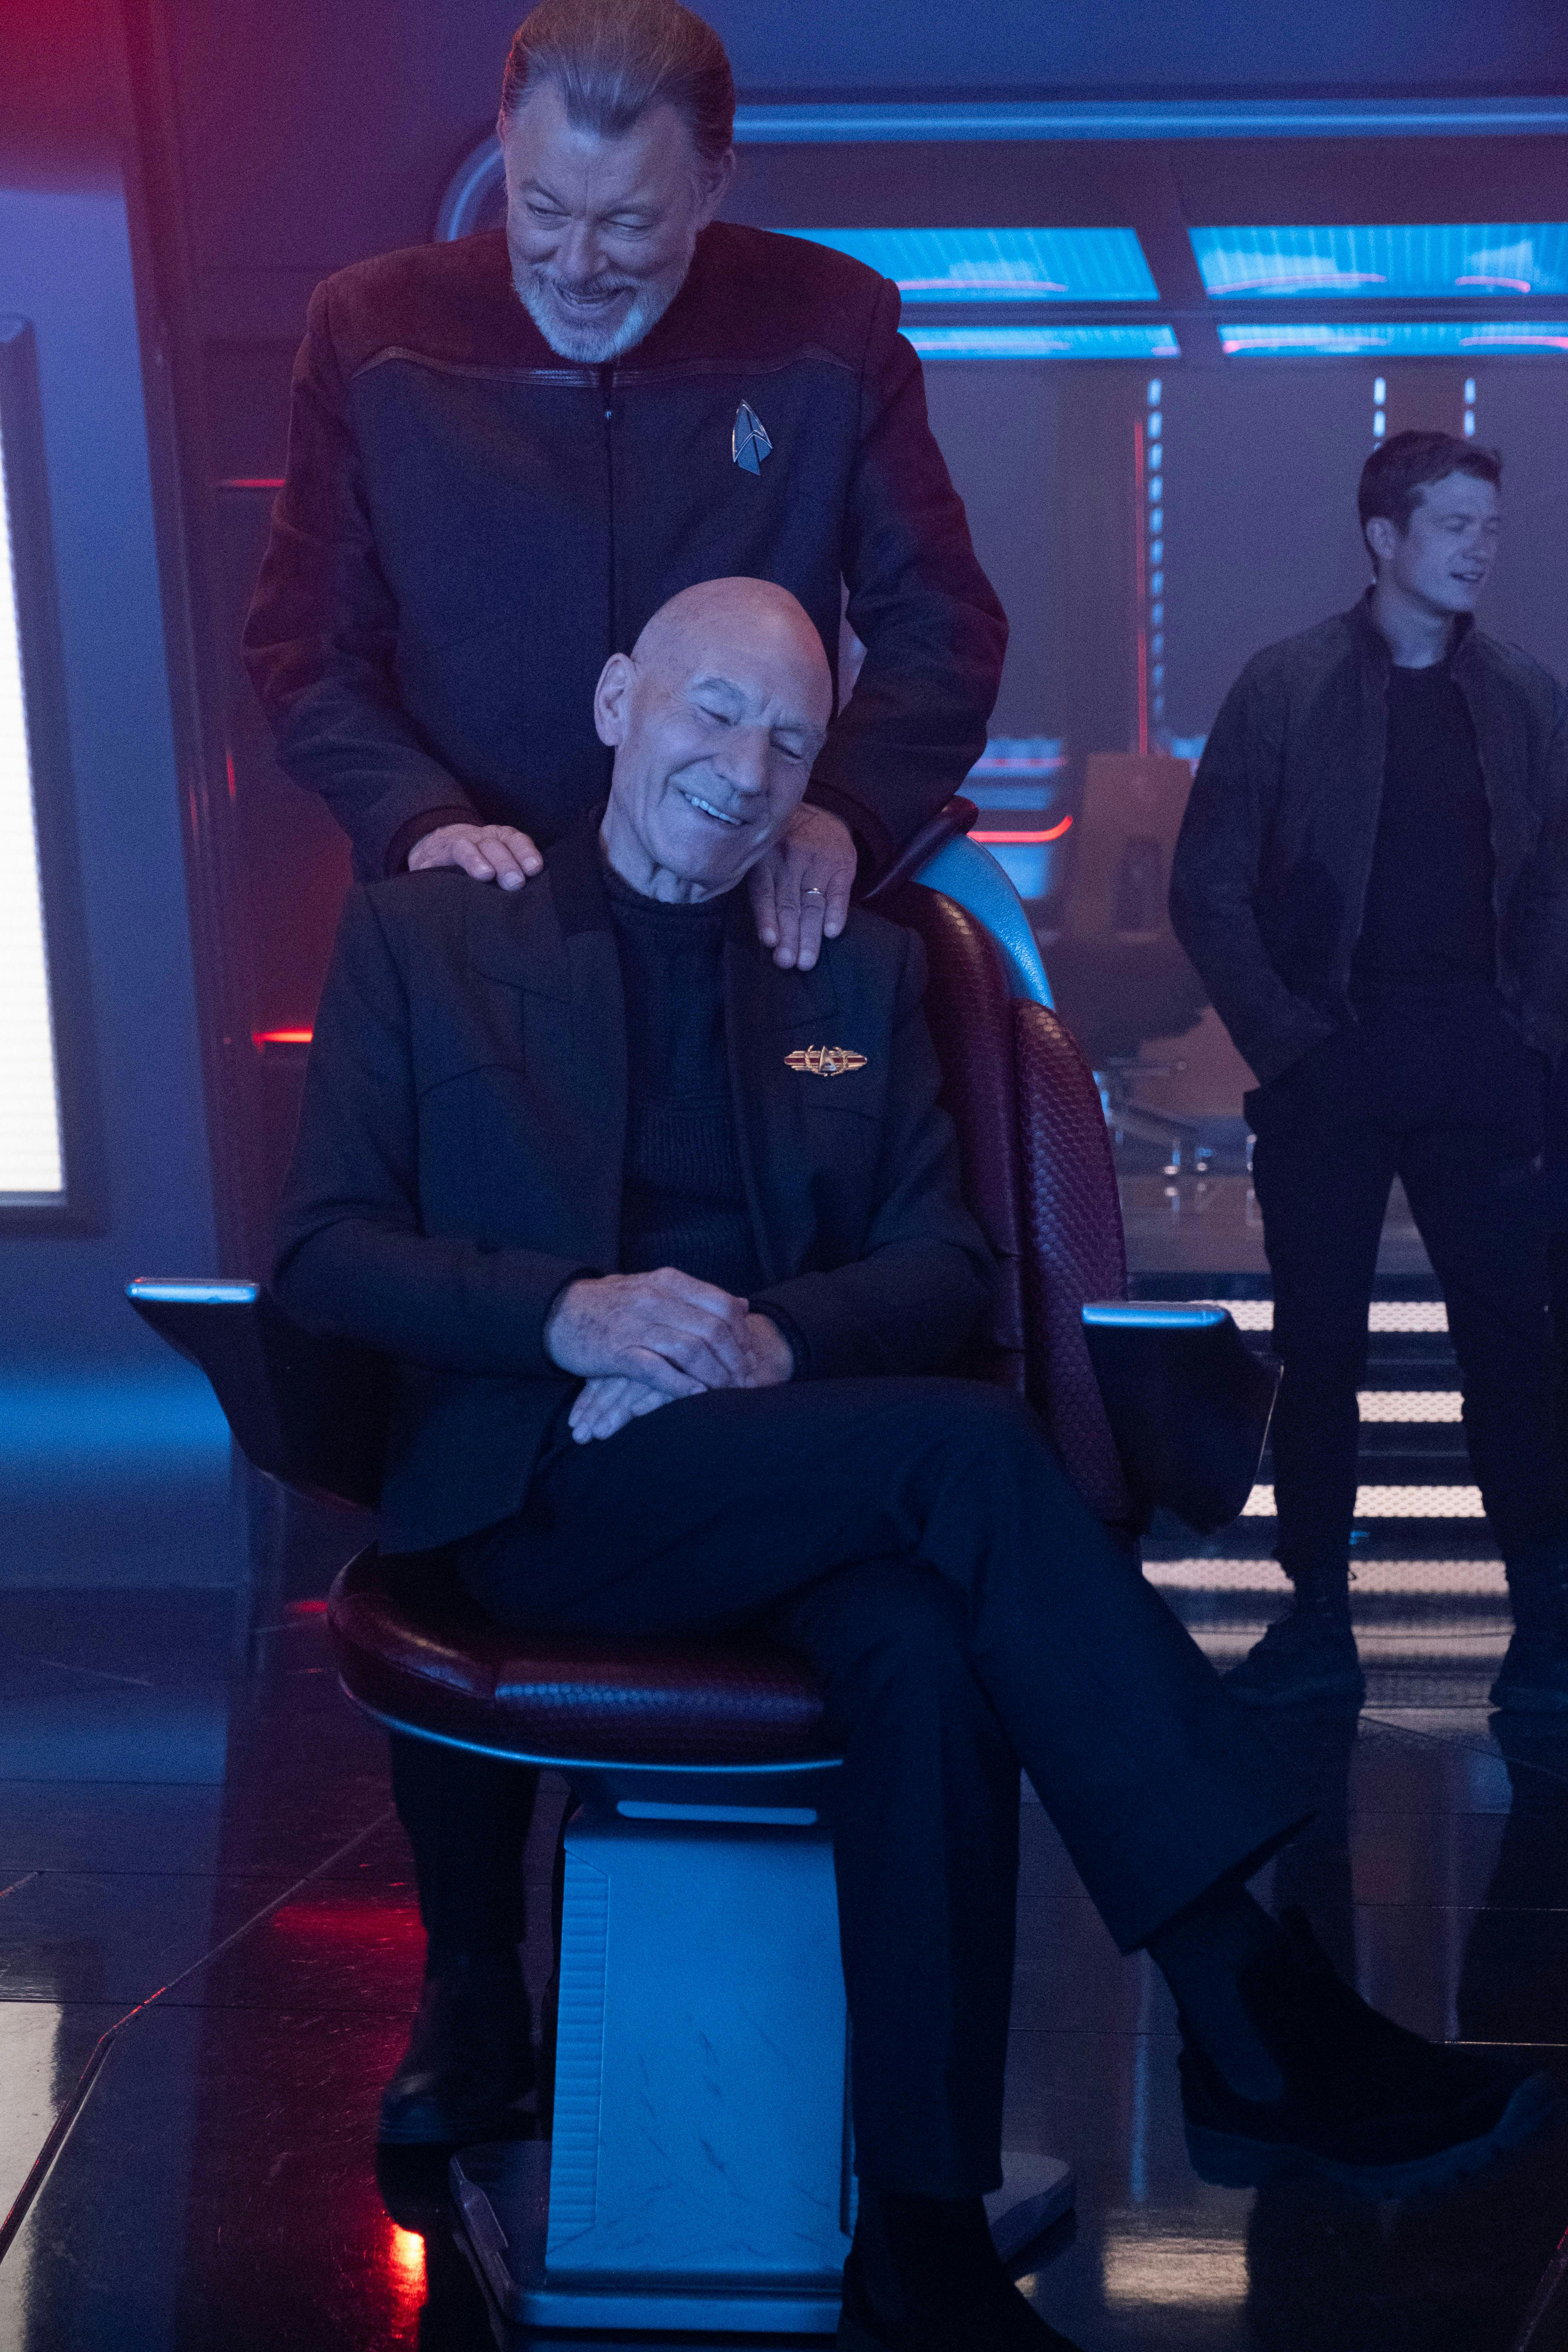 Star Trek: Picard BTS still - Patrick Stewart sits in the captain's chair smiling while Jonathan Frakes stands behind with his hands on his shoulder